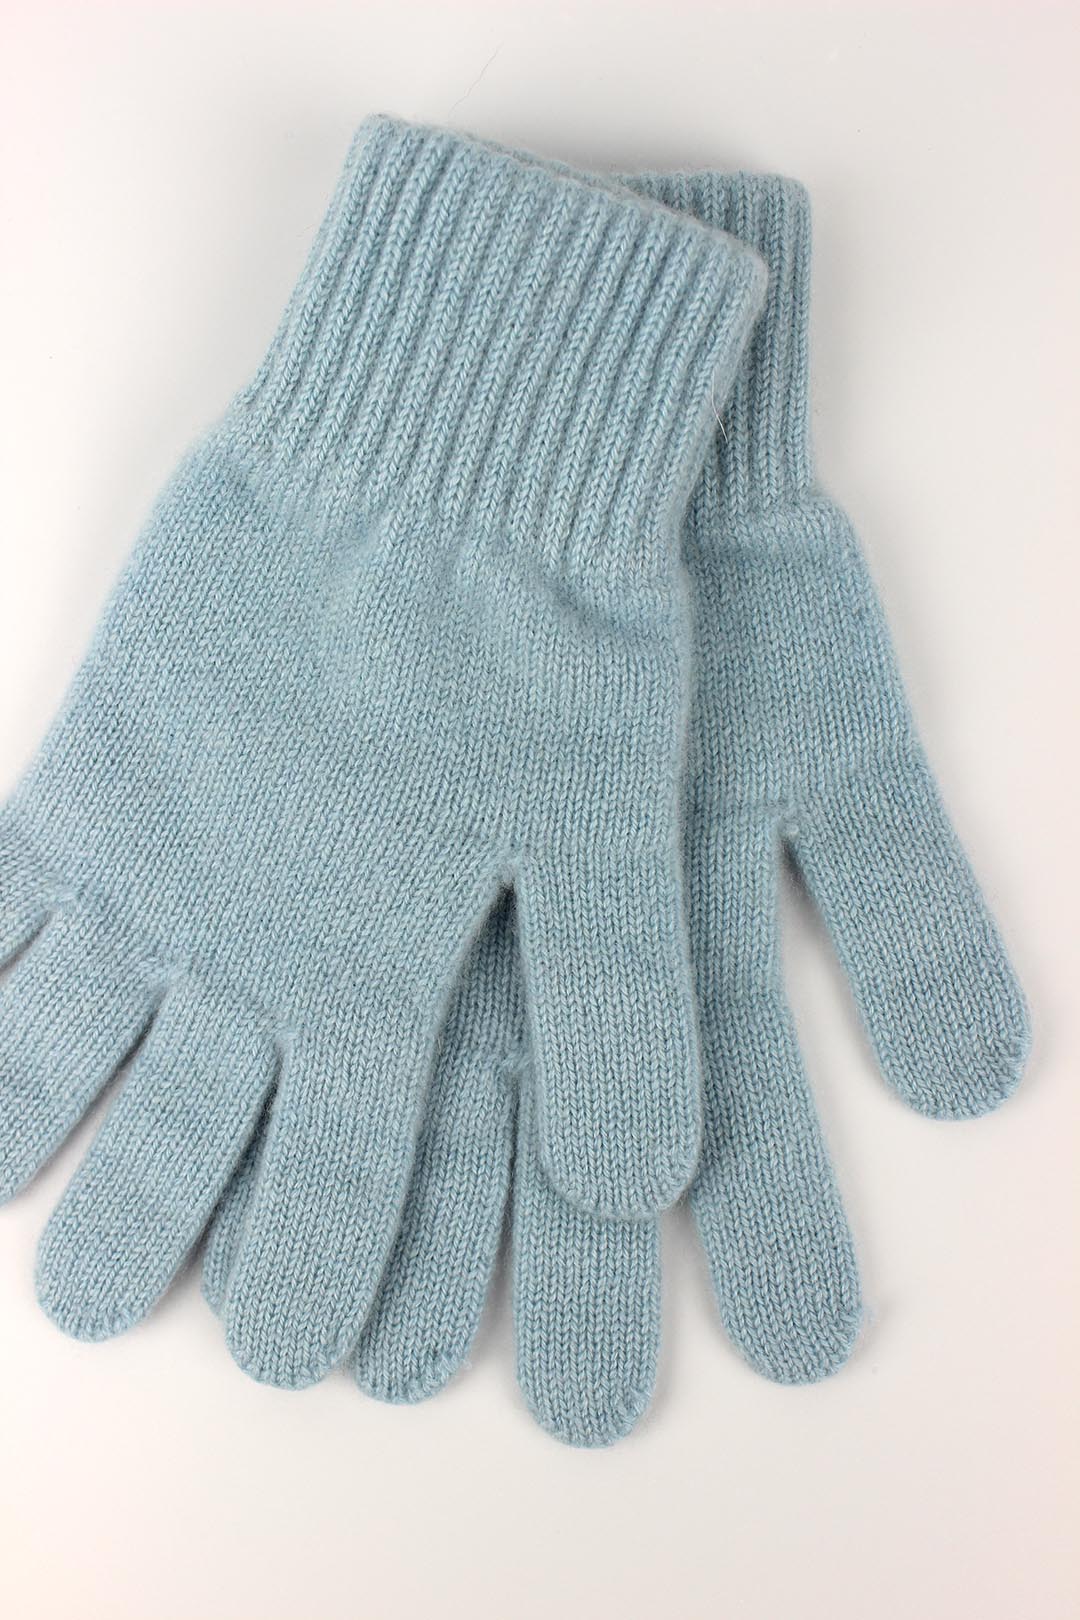 Cashmere gloves in shades of blue. Knitted in the Scottish borders